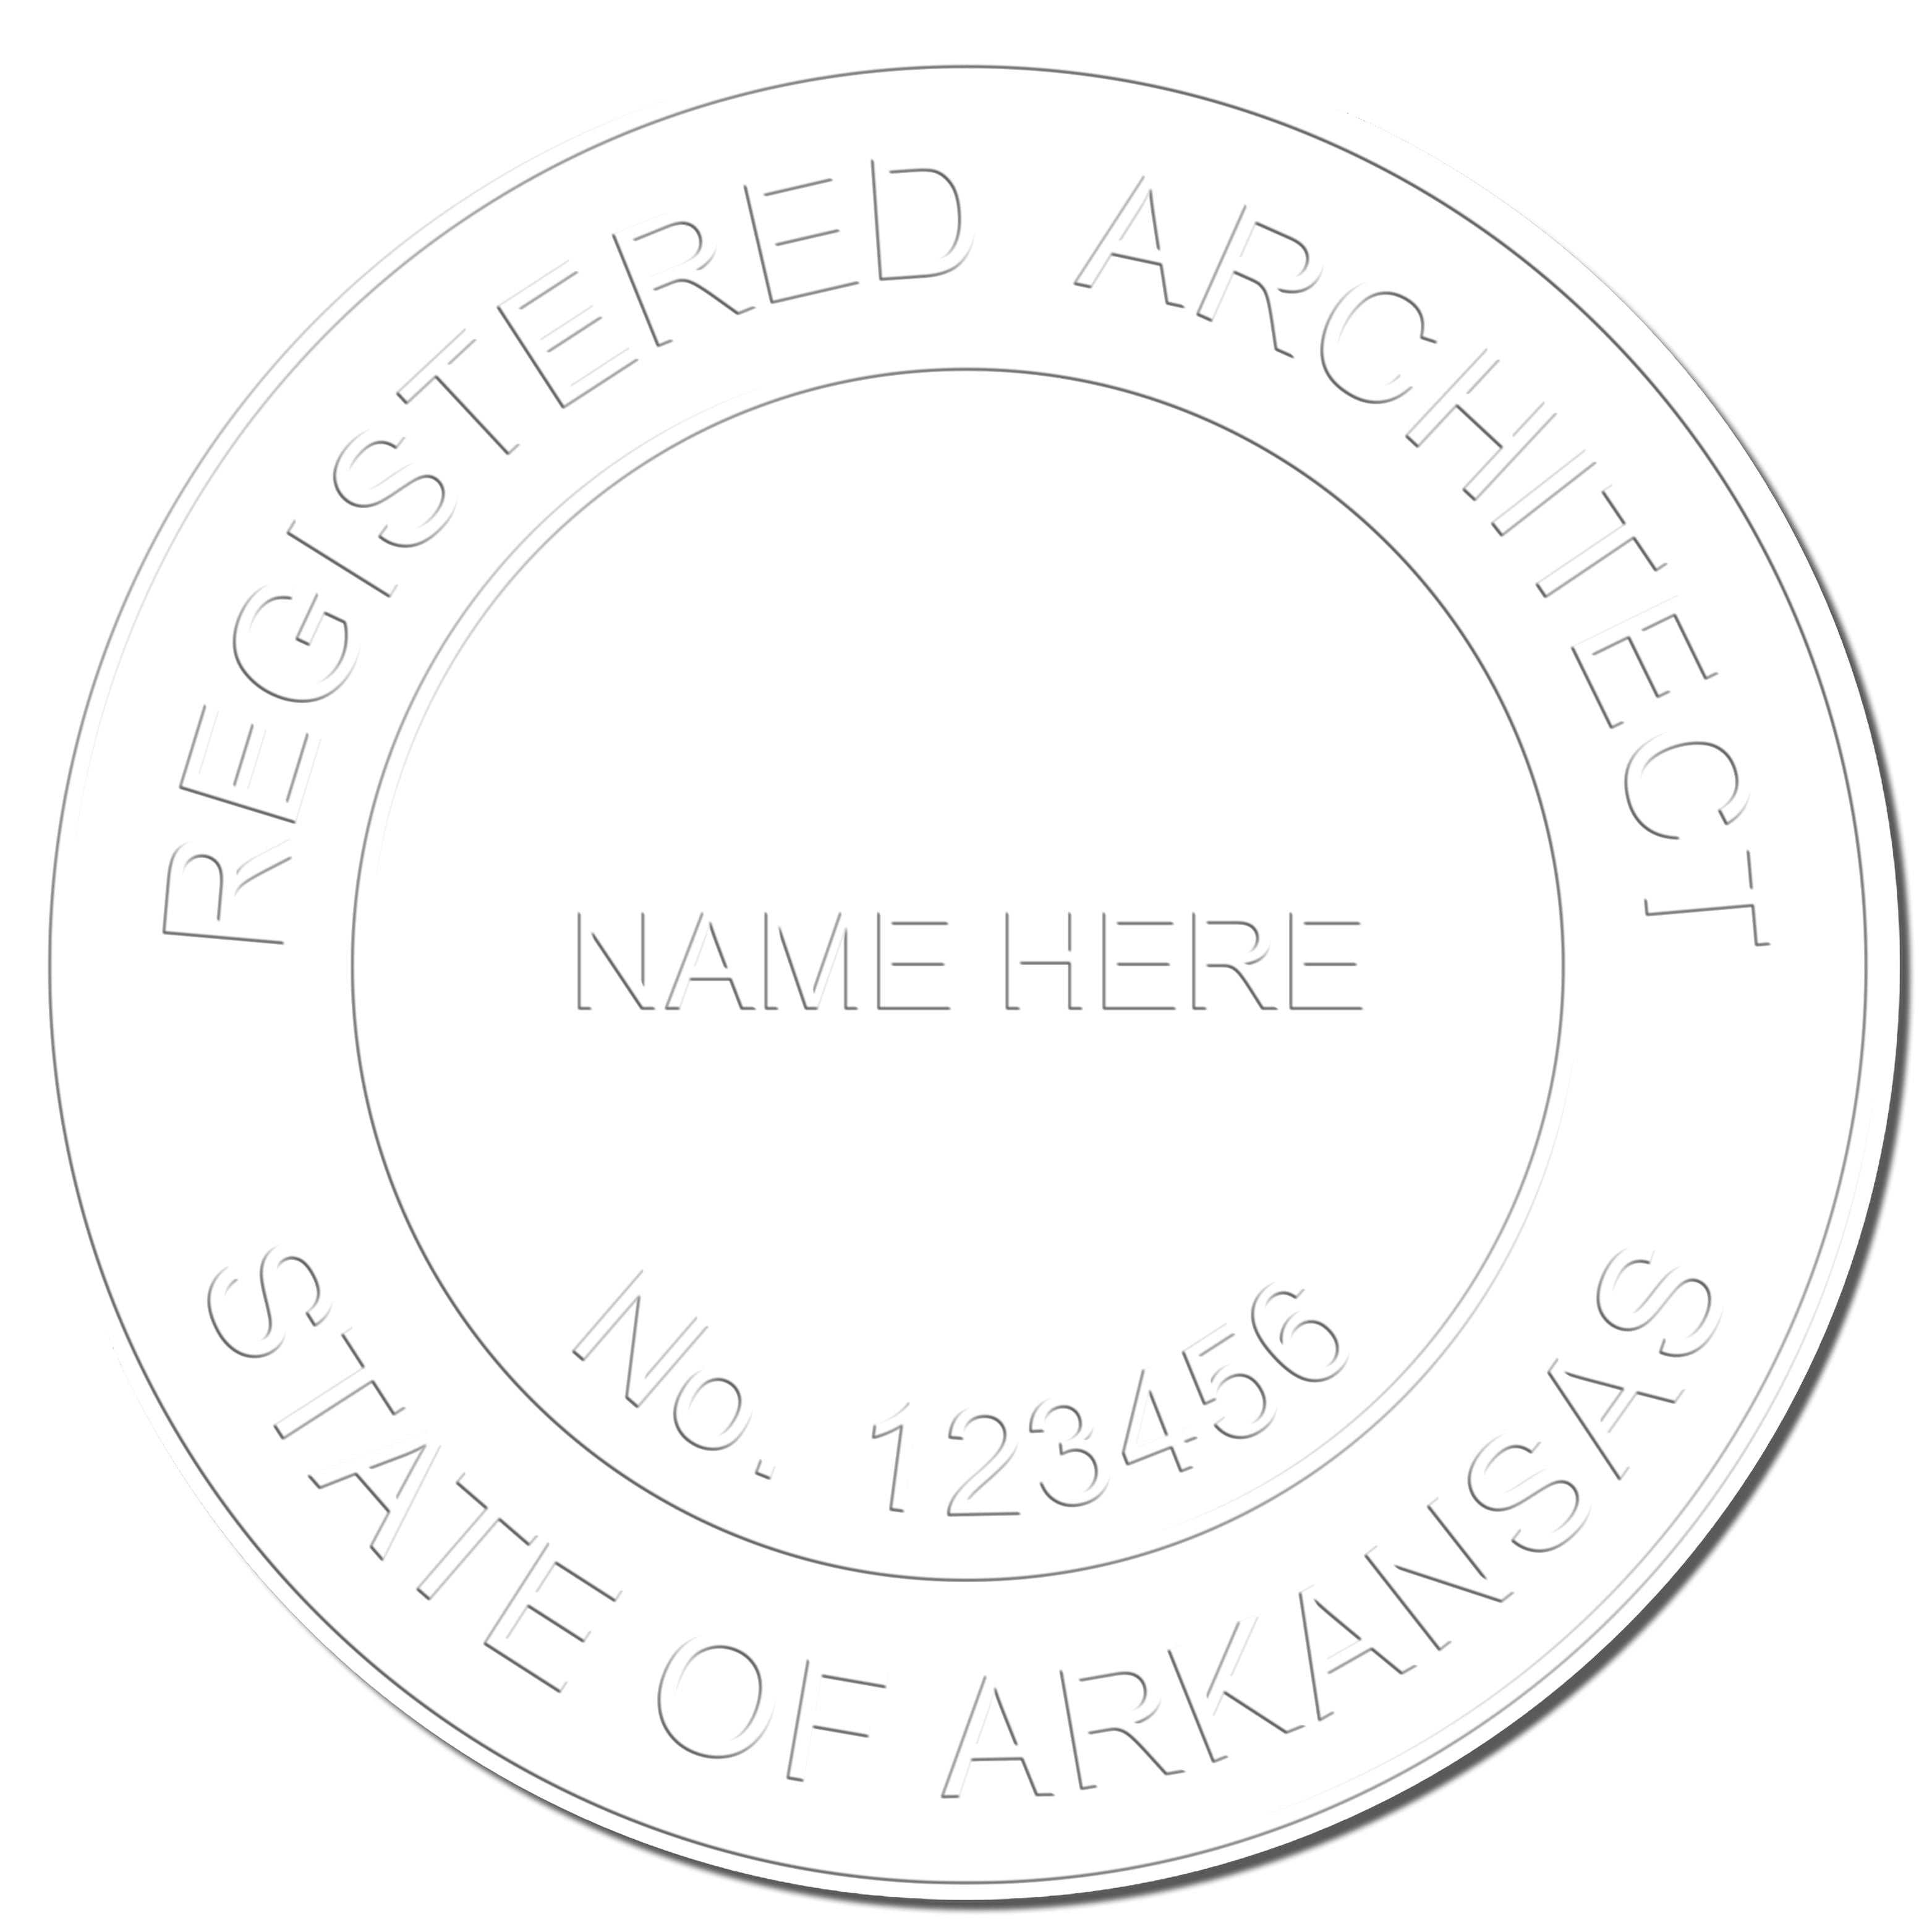 This paper is stamped with a sample imprint of the Gift Arkansas Architect Seal, signifying its quality and reliability.